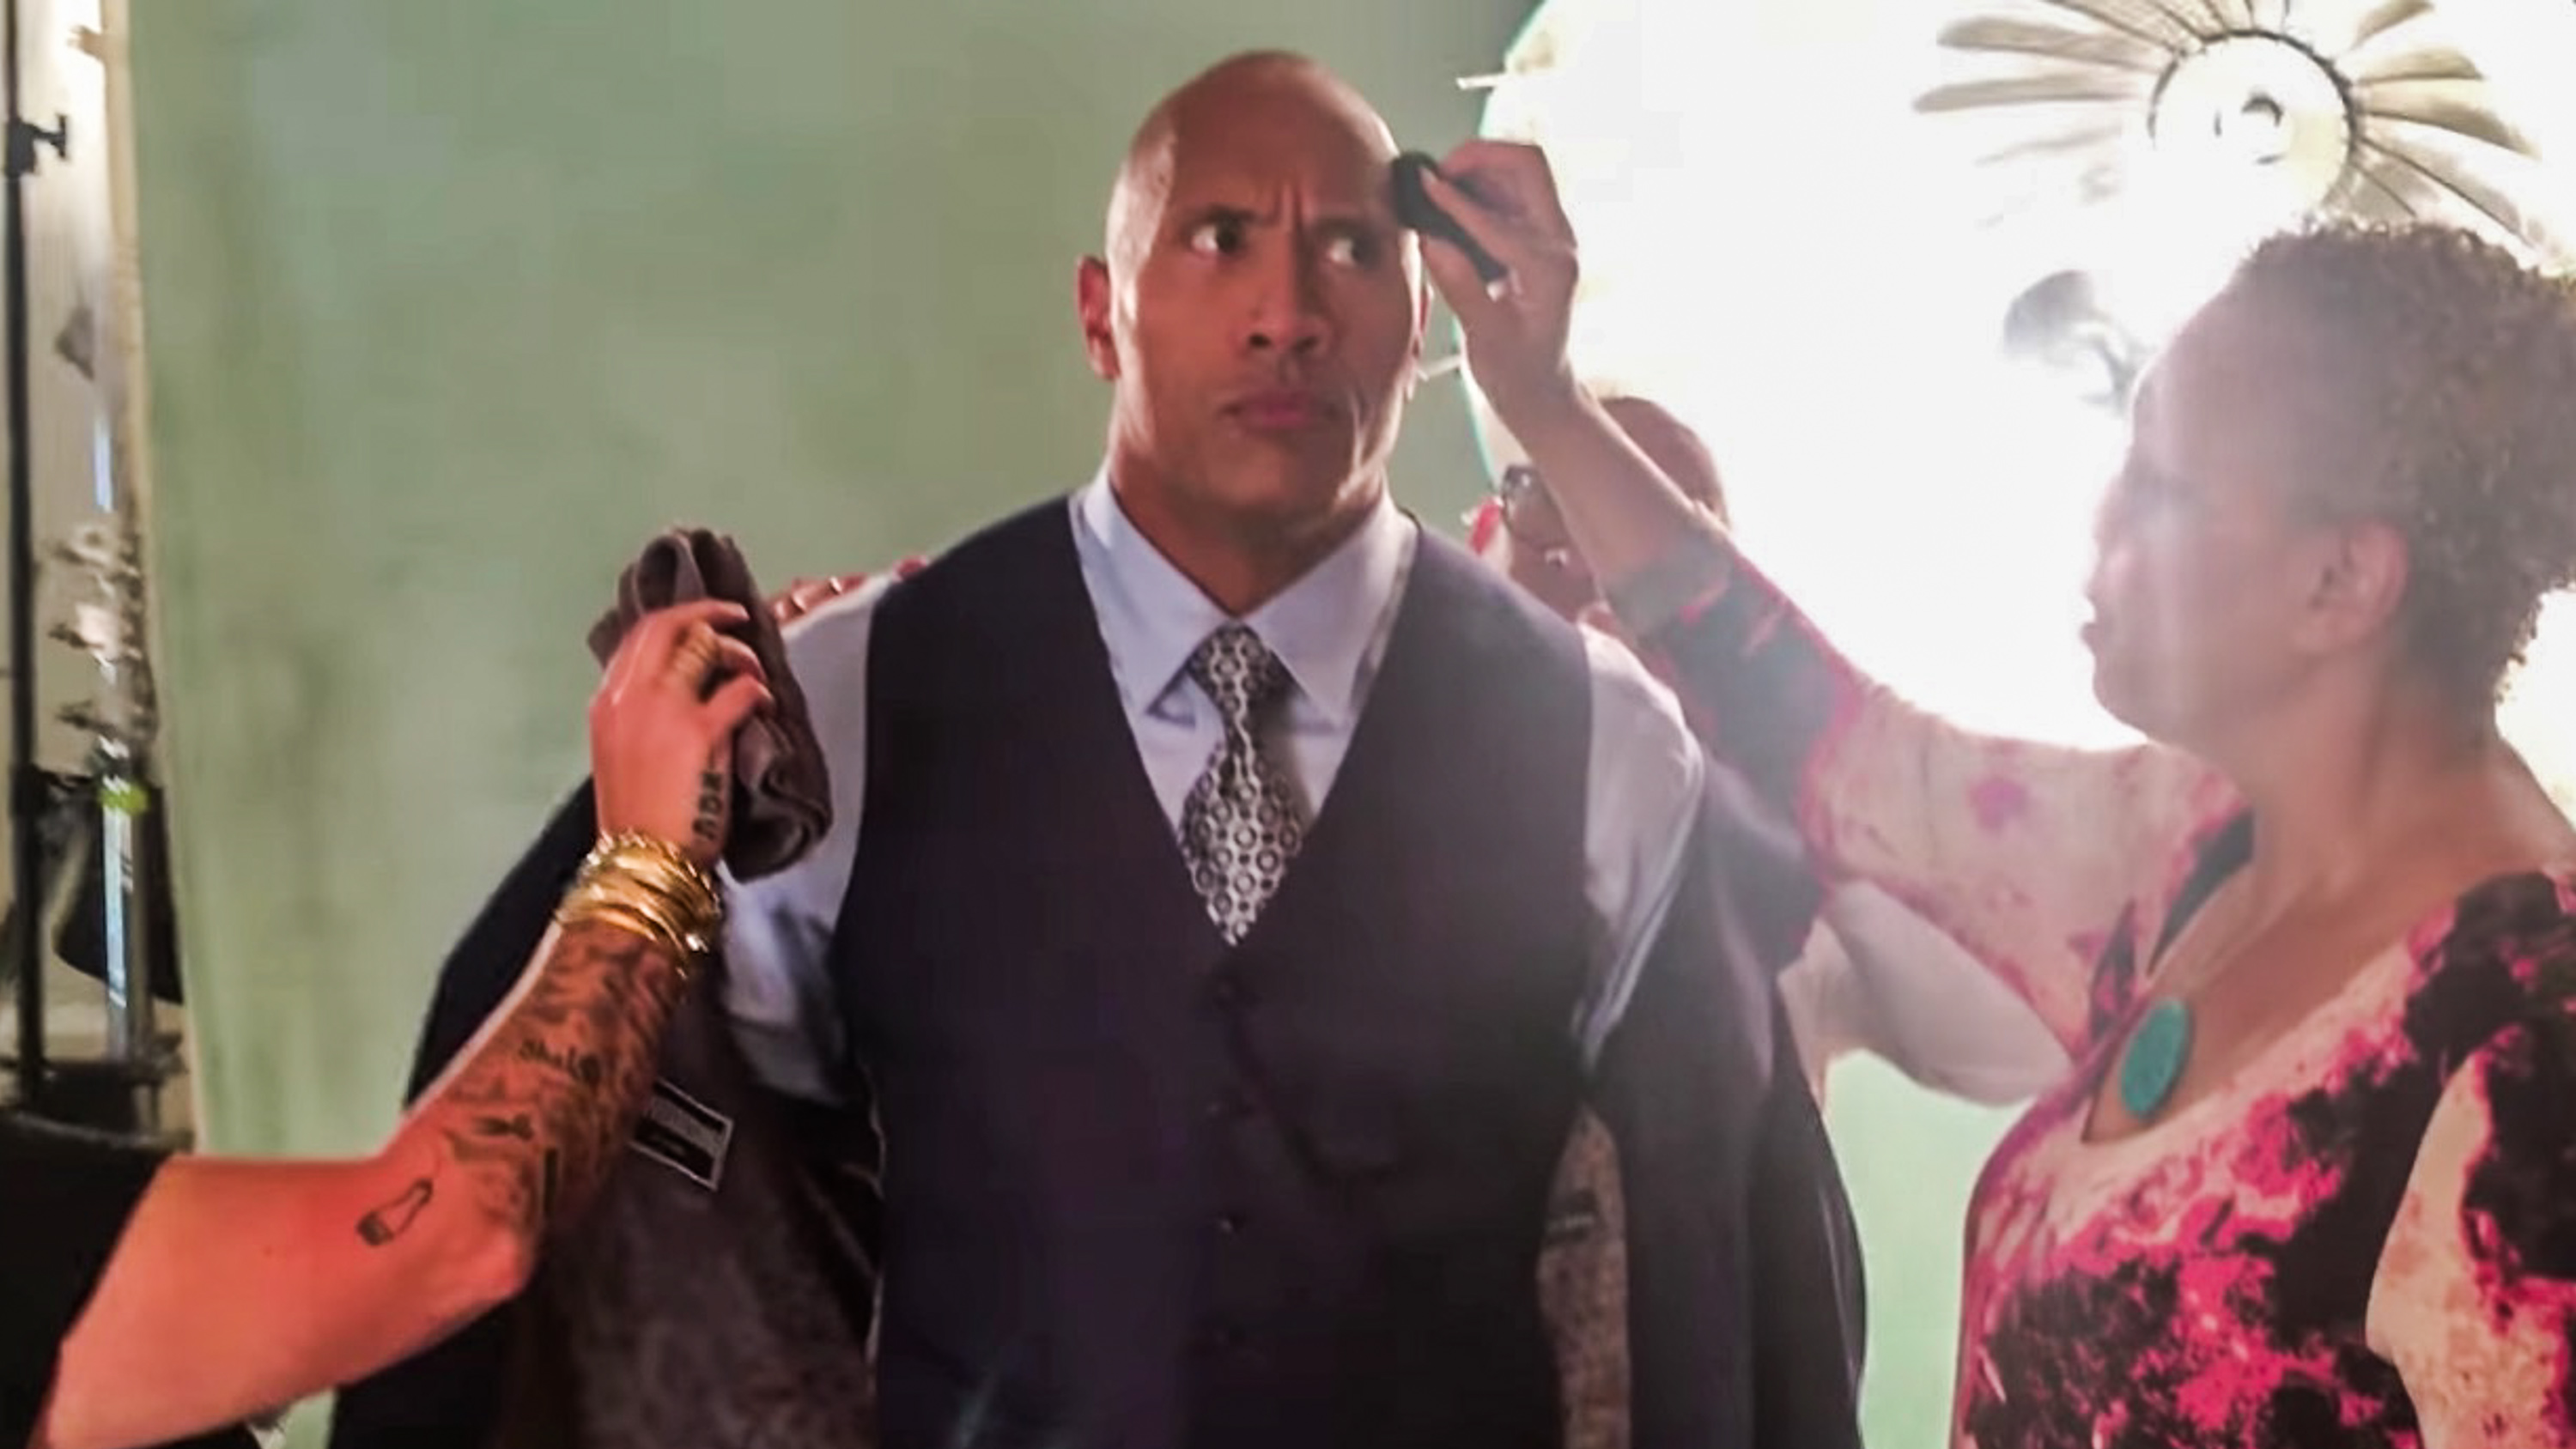 THE ROCK. Dwayne Johnson, aka 'The Rock,' is just one of the stars who did the 'Mannequin Challenge.' Screengrab from YouTube/The Rock  